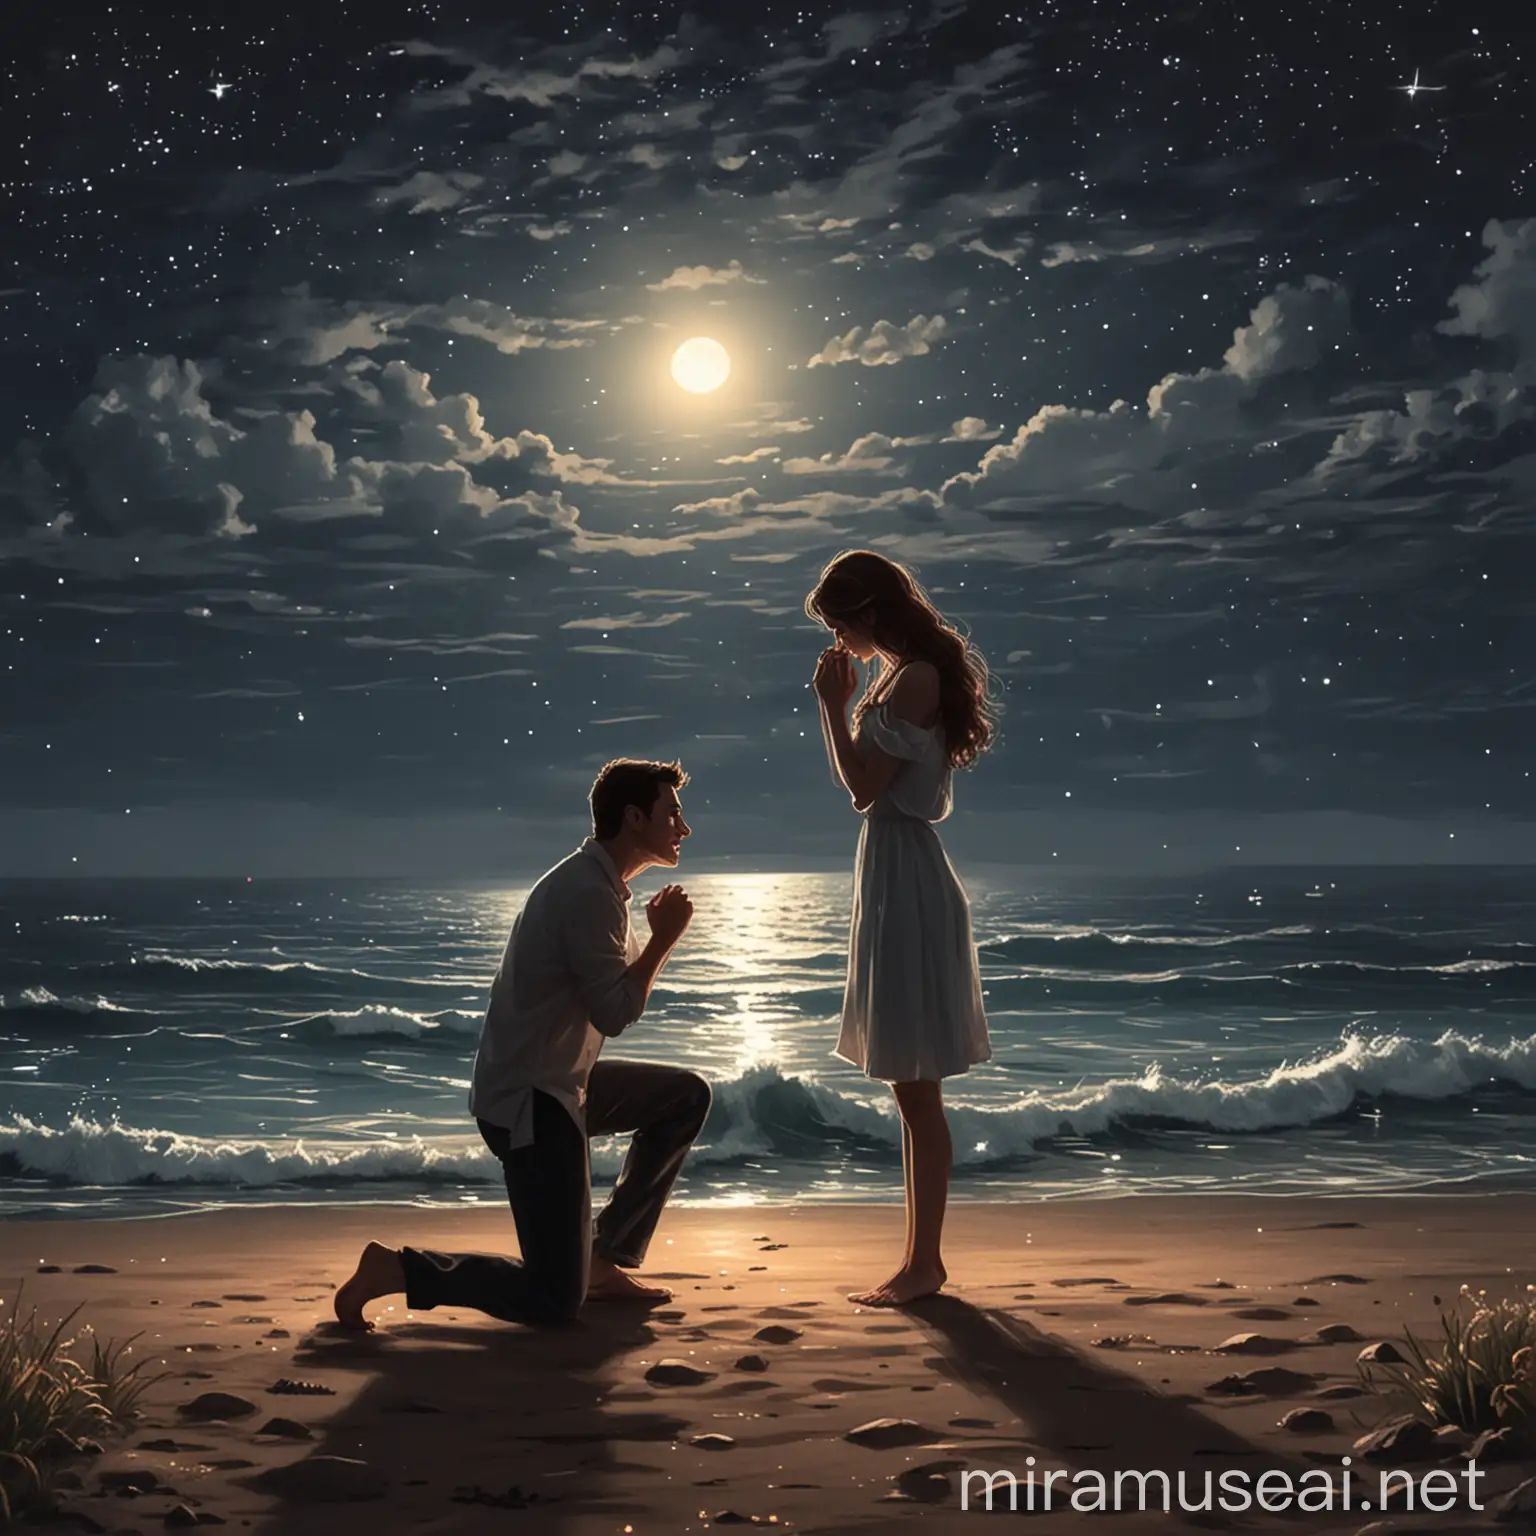 draw a guy proposing to a girl by the sea at night. Only the man is on one knee and the girl is standing